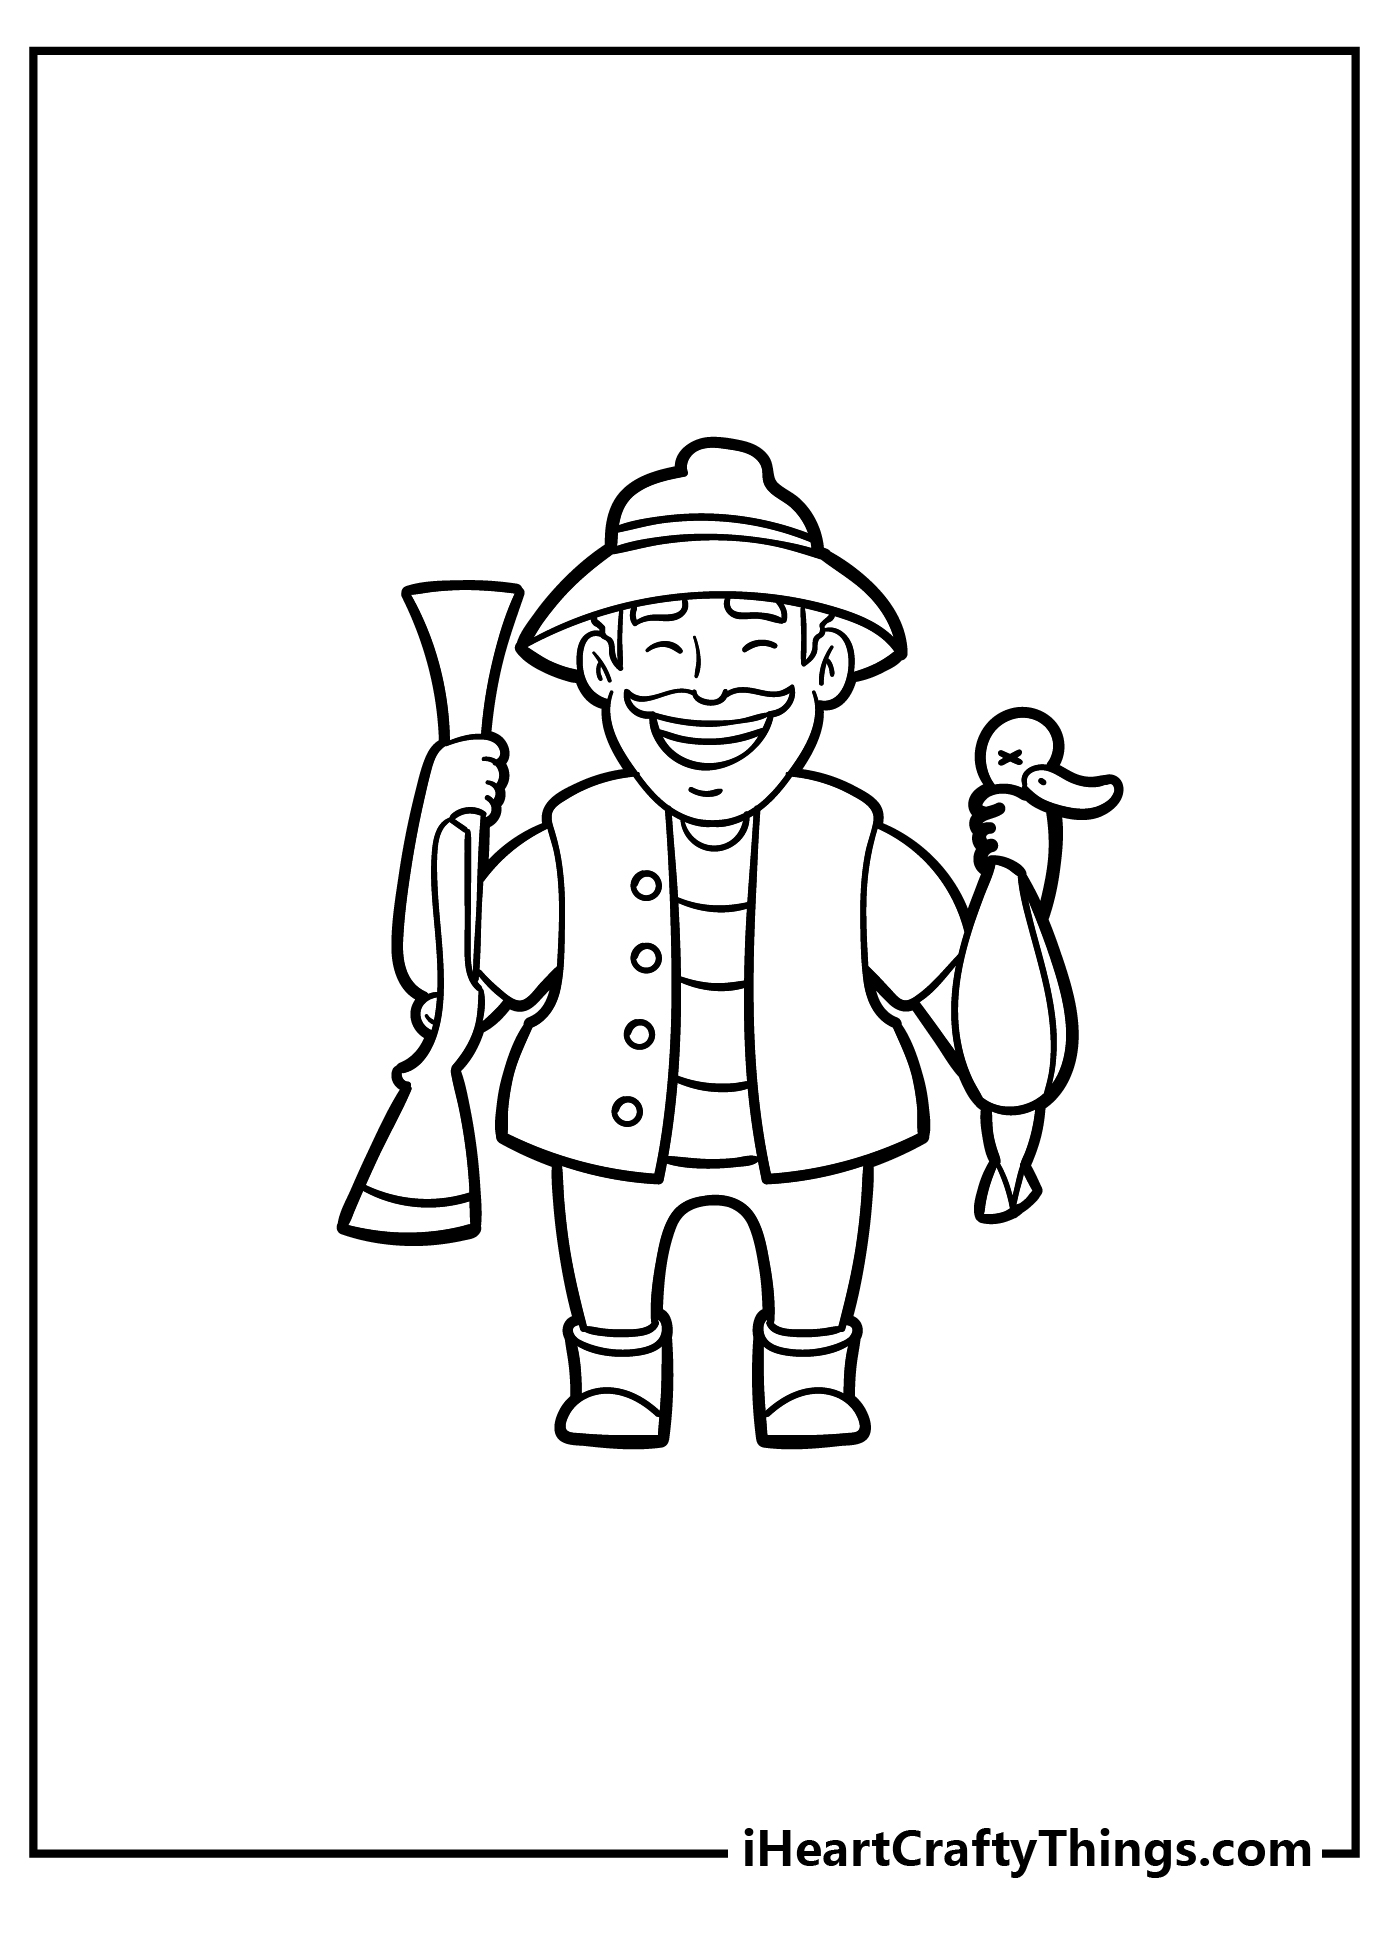 Hunting Coloring Pages for preschoolers free printable